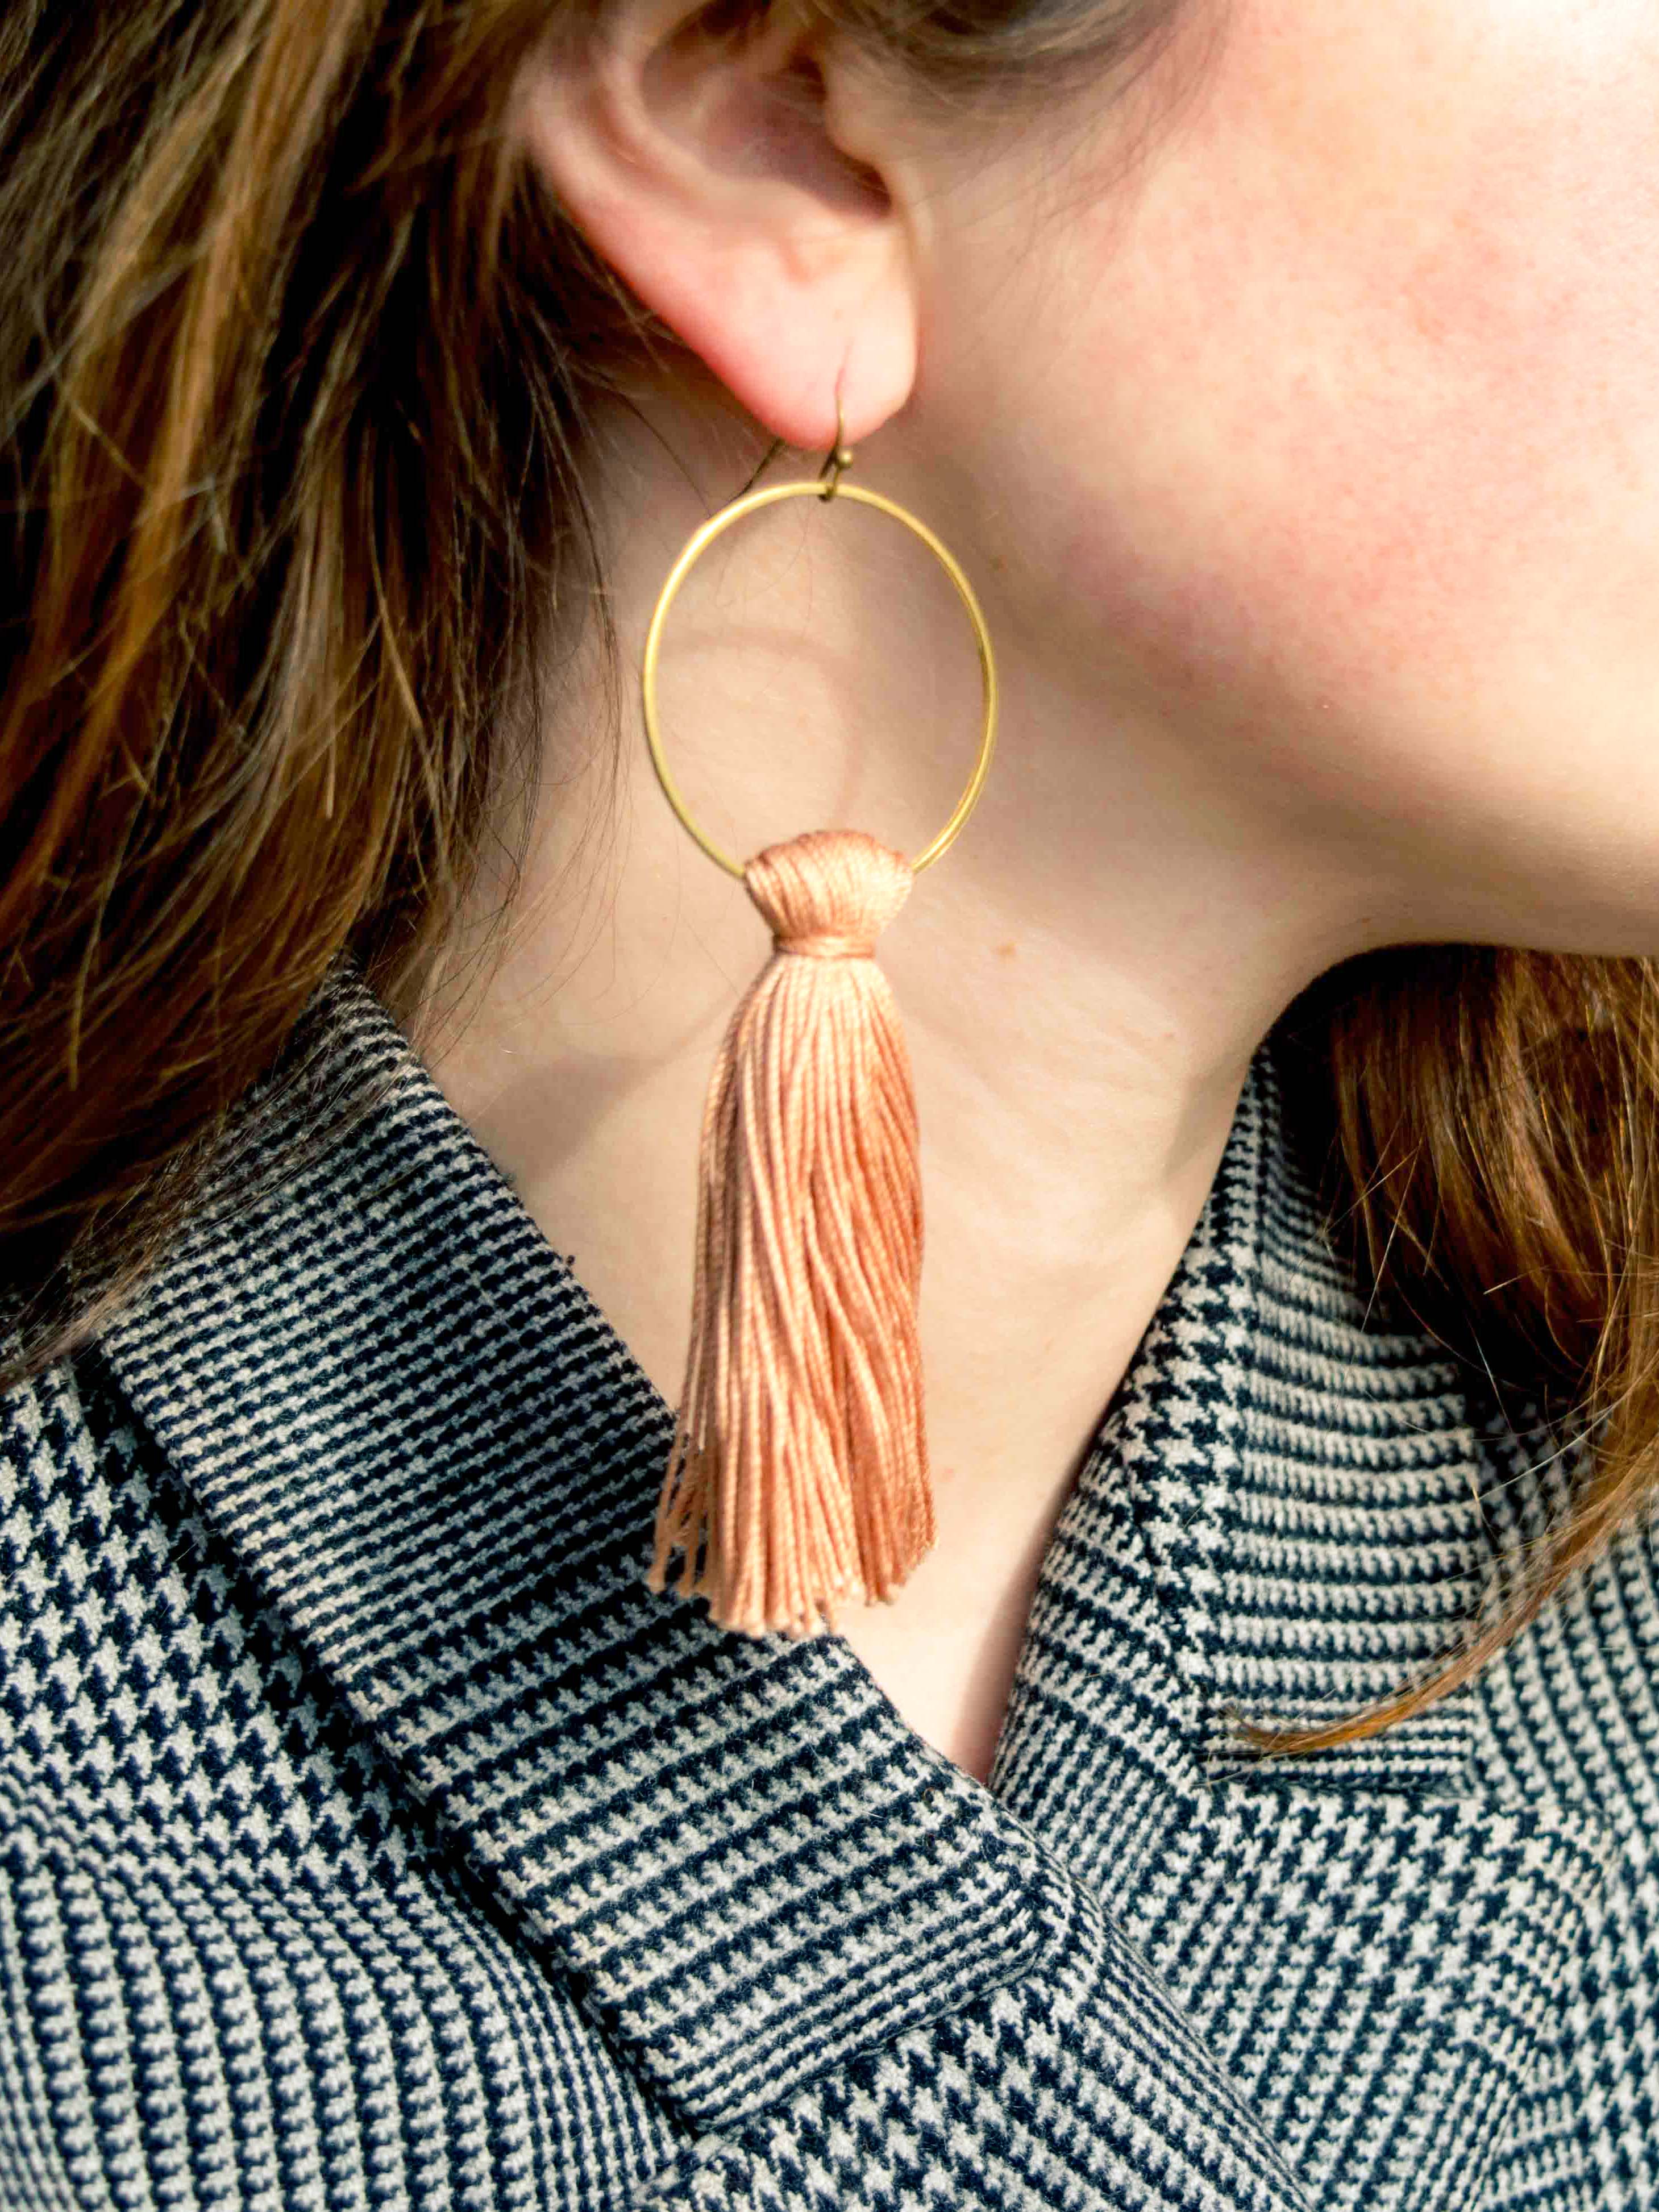 Peachy tassel earrings by Fate & Coincidence, $30